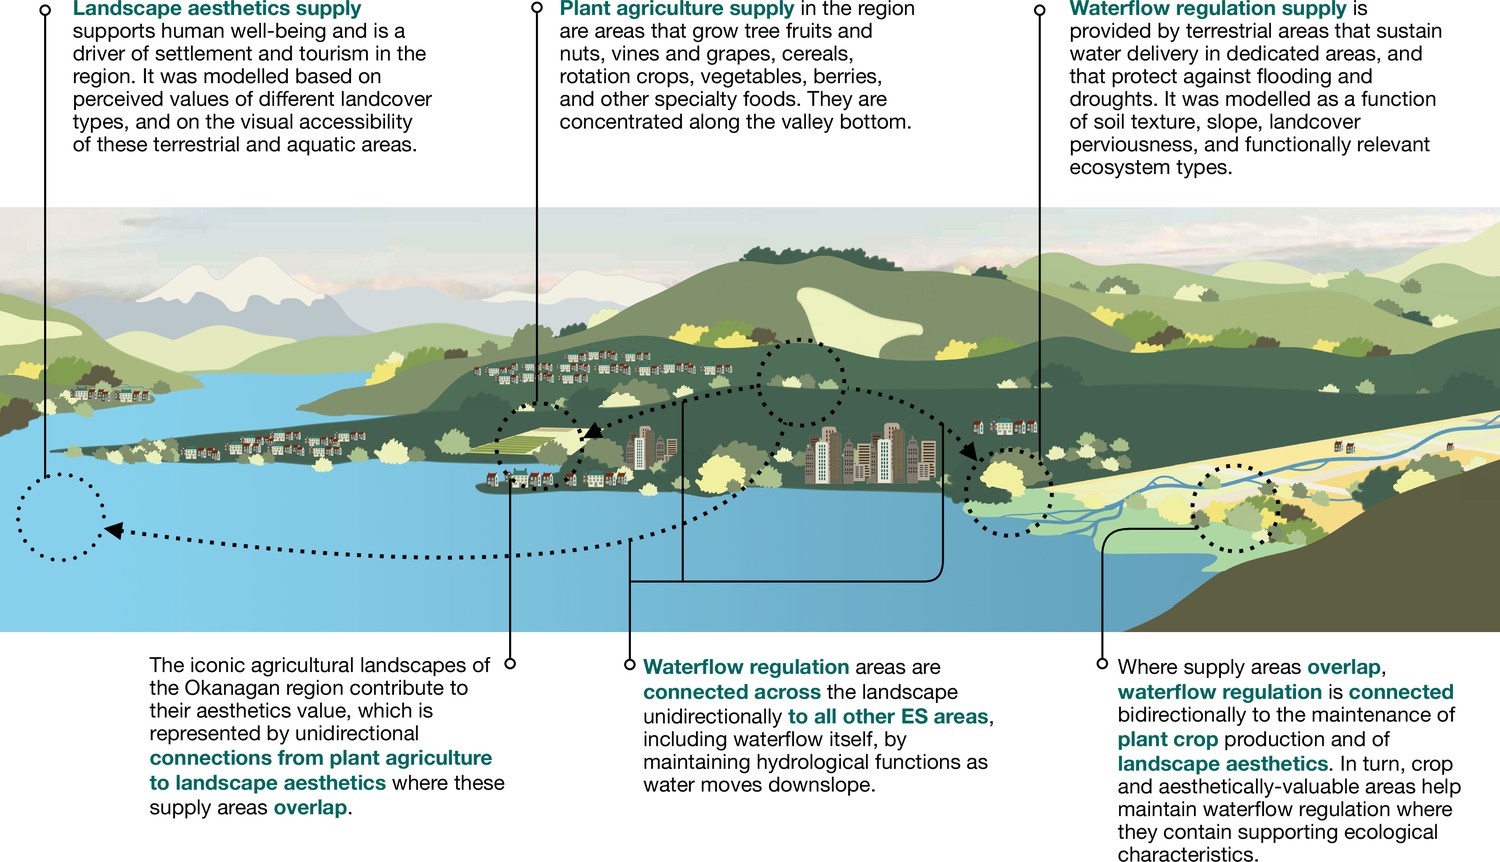 Modeling of ecosystem services in the face of the effects of